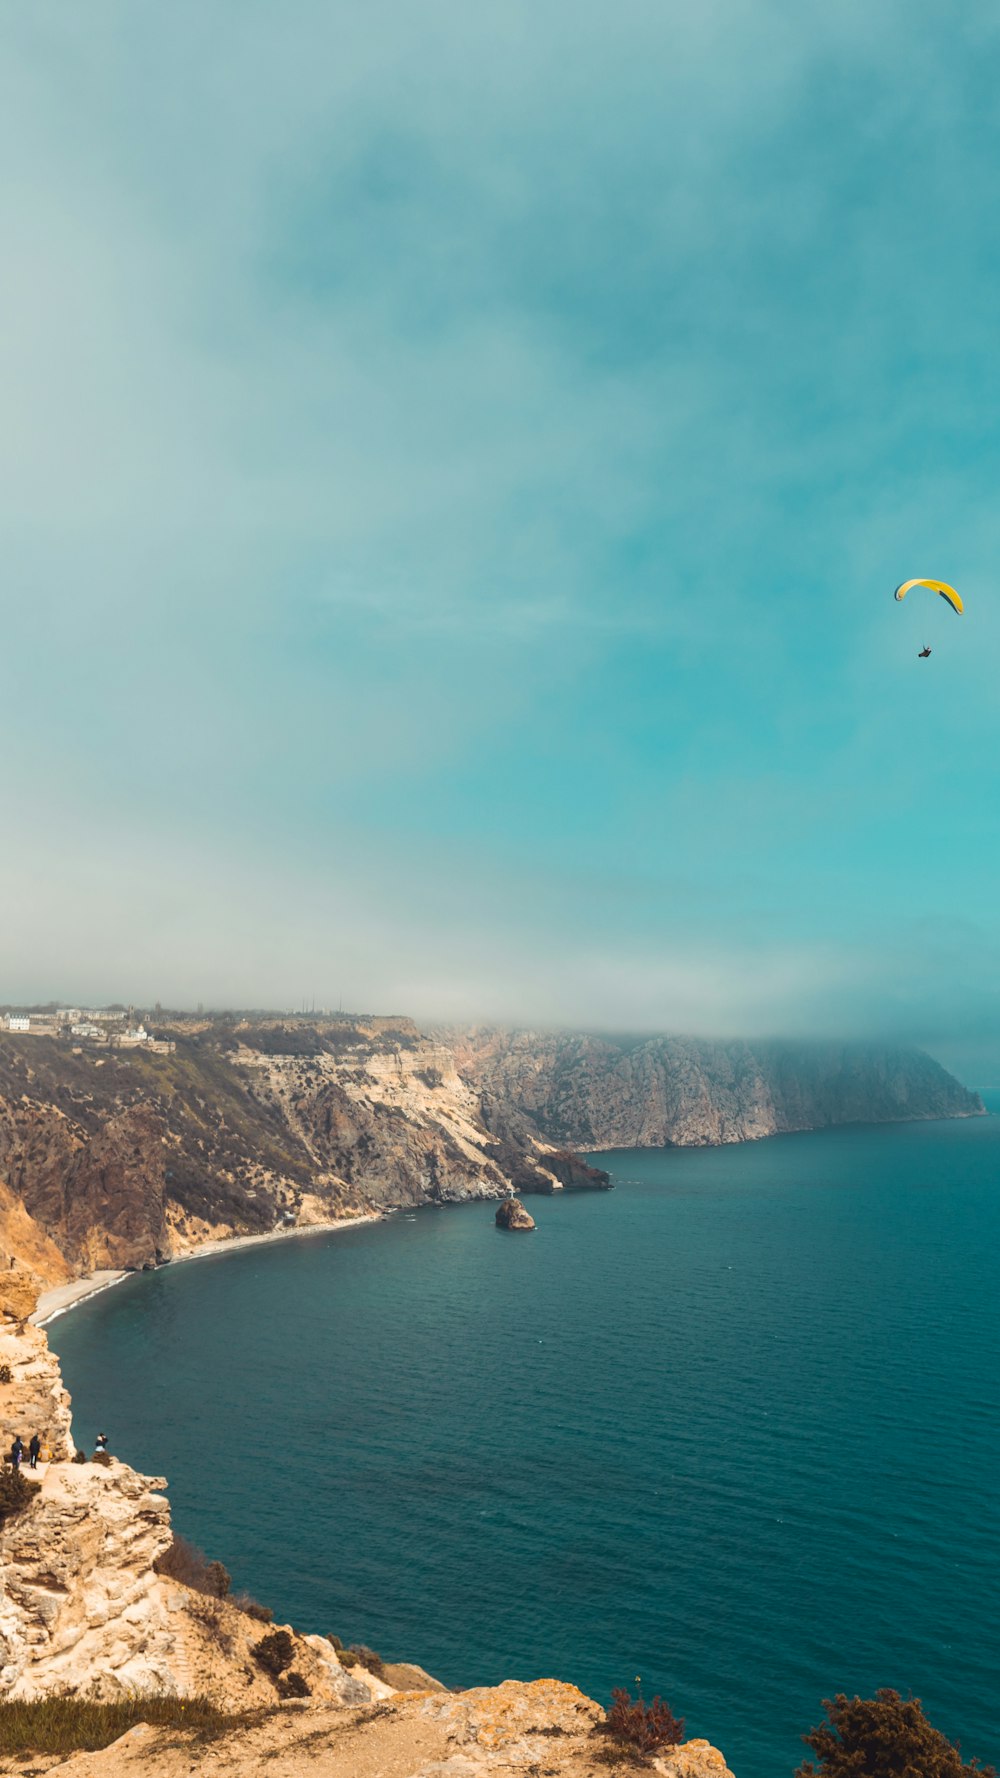 a paraglider flying over a large body of water